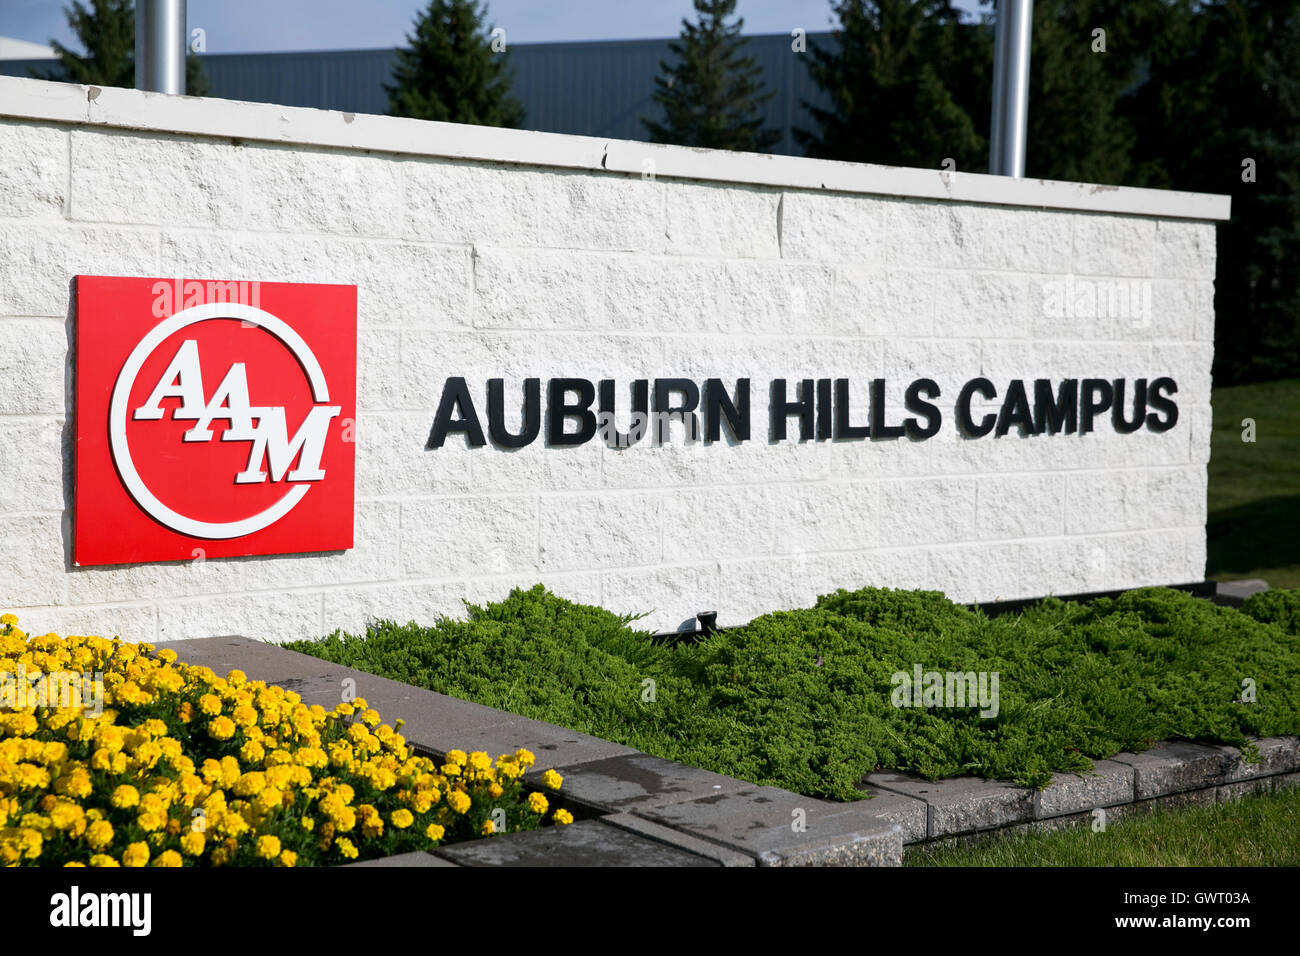 A logo sign outside of facility occupied by American Axle & Manufacturing, Inc., in Auburn Hills, Michigan on July 17, 2016. Stock Photo